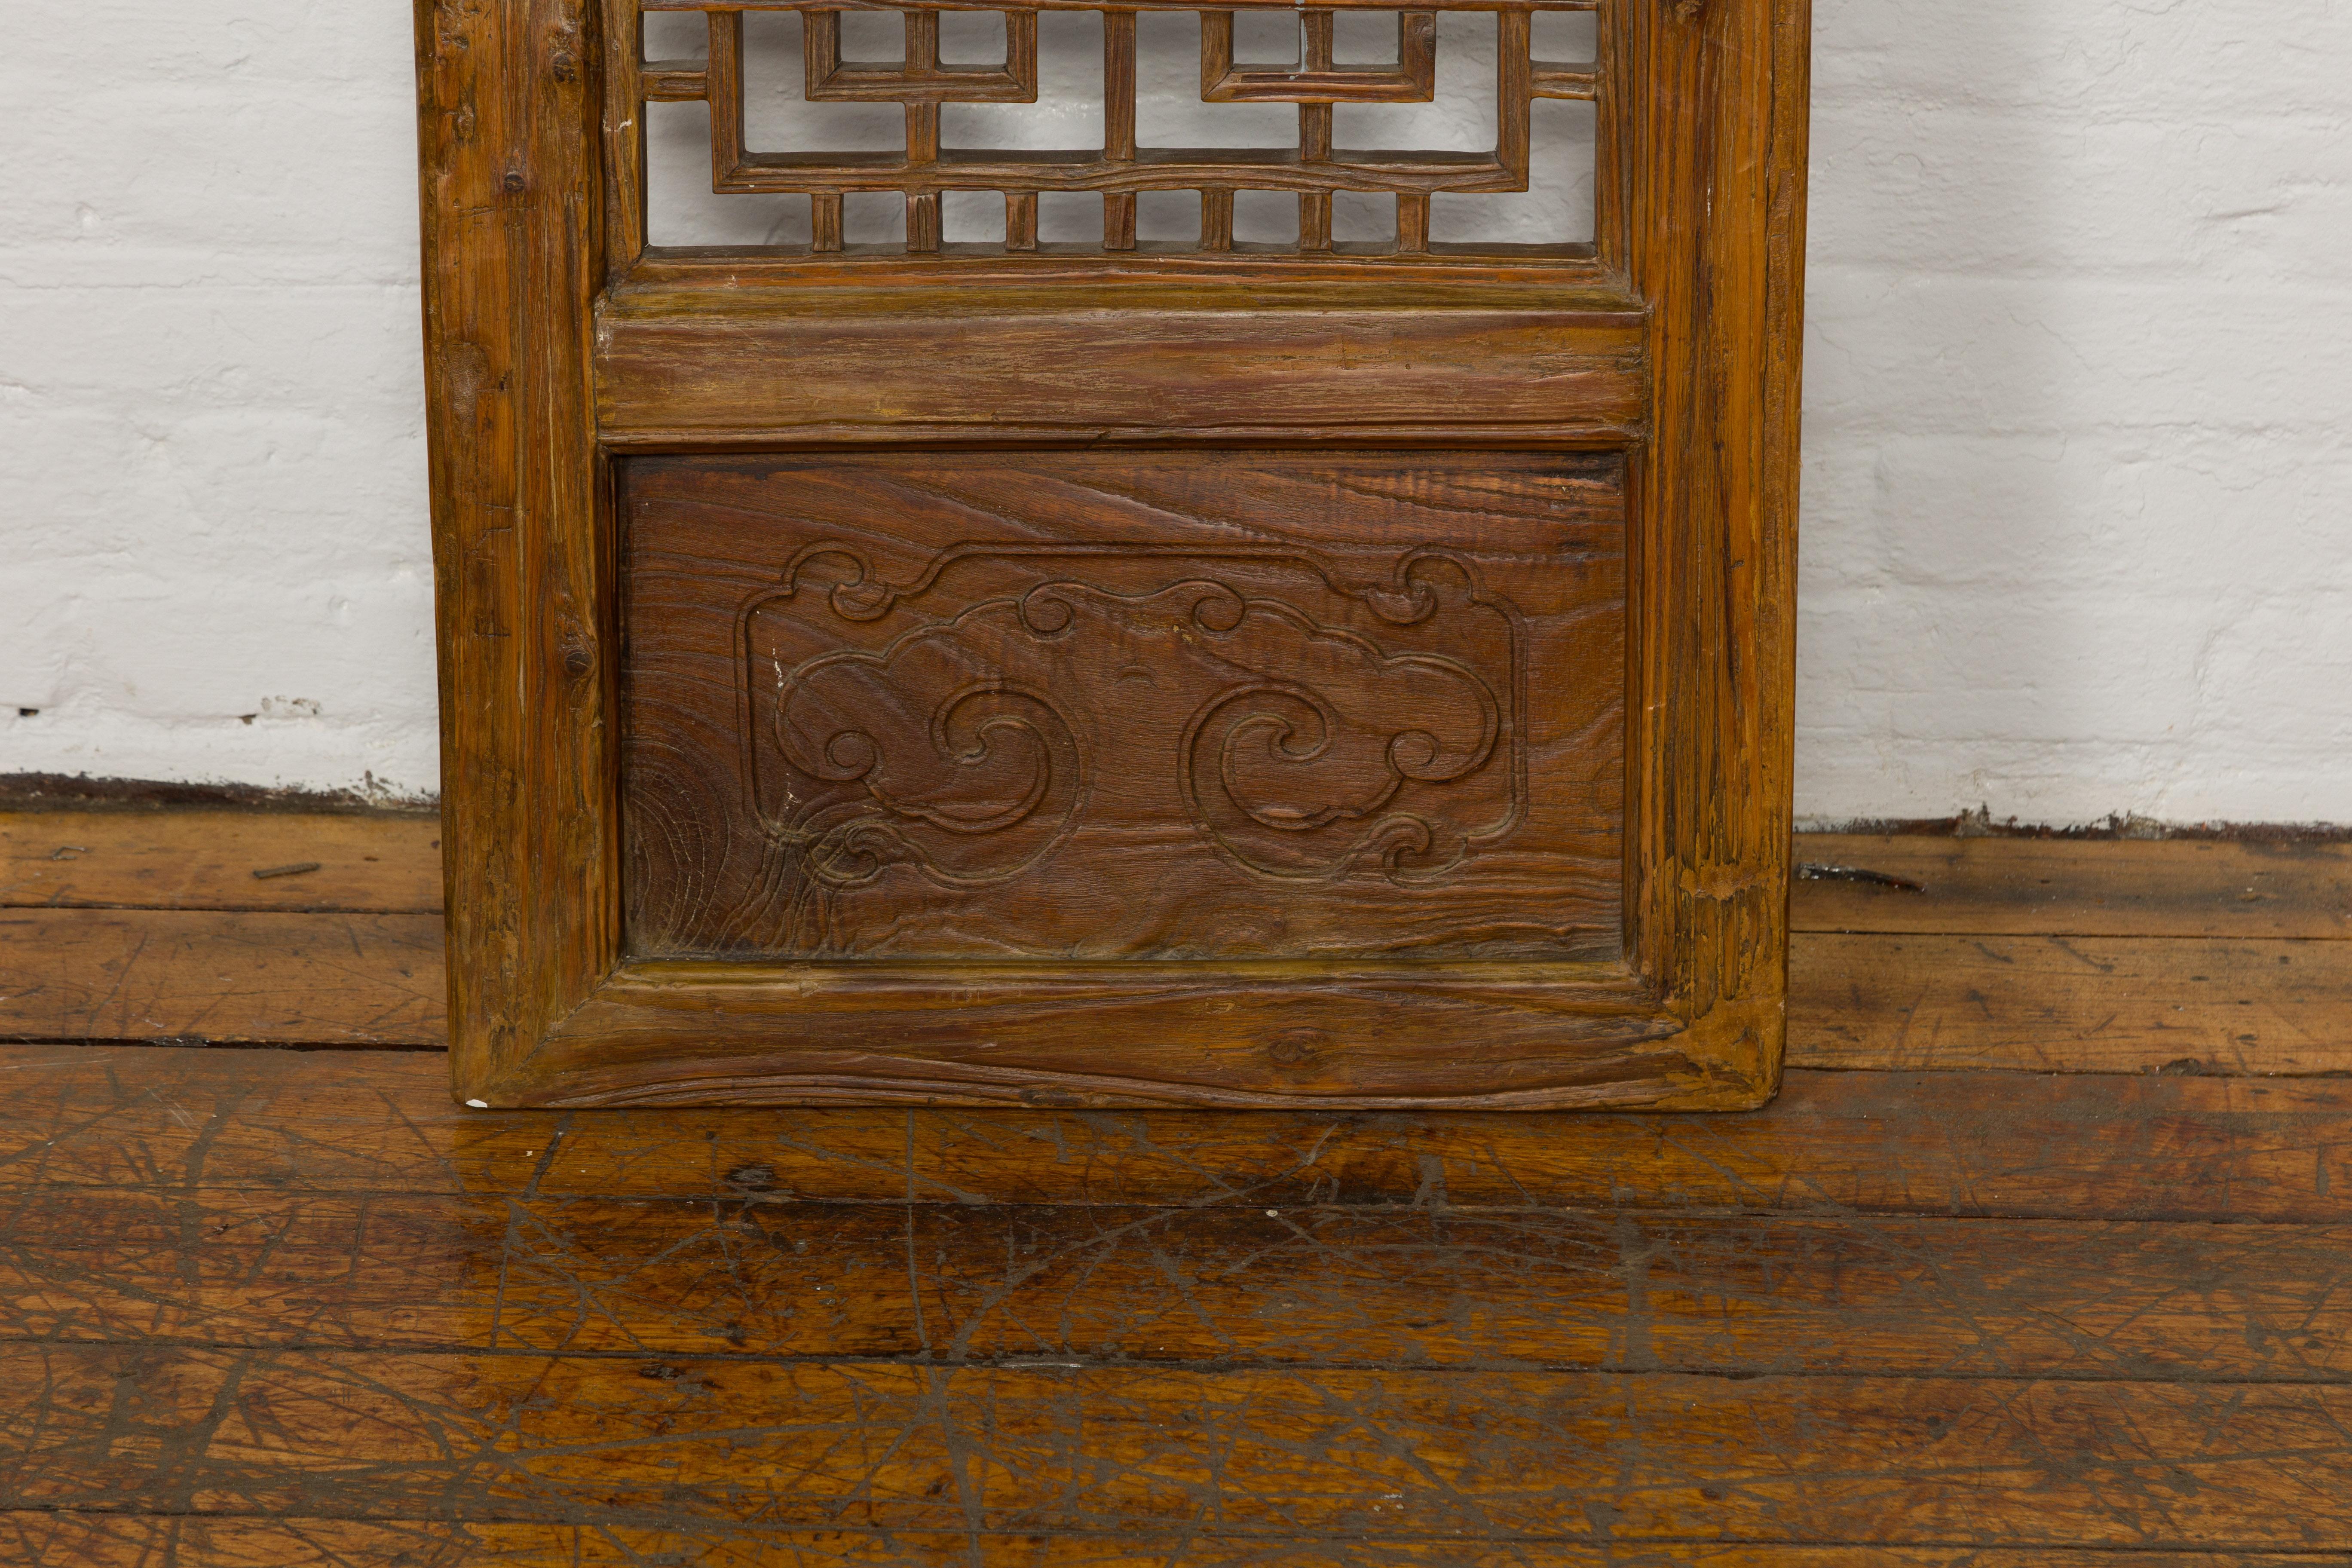 Chinese Qing Dynasty 19th Century Fretwork Screen with Carved Scrolling Motifs For Sale 7